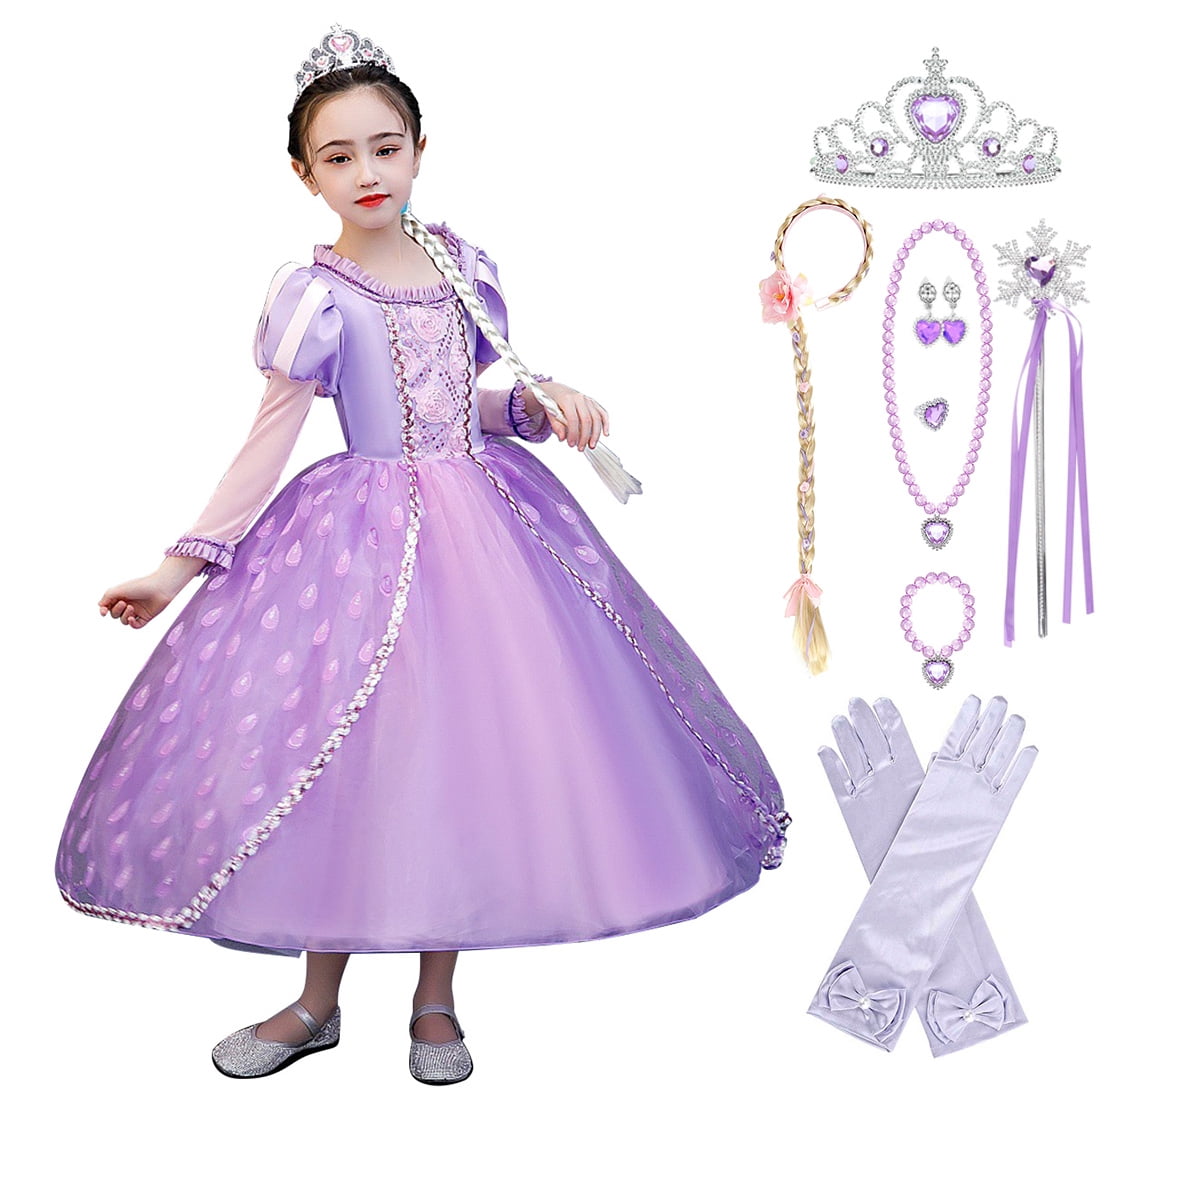 Rapunzel Tangled Girls Fancy Dress Princess Party Costume Outfit Proms Xmas Gift 